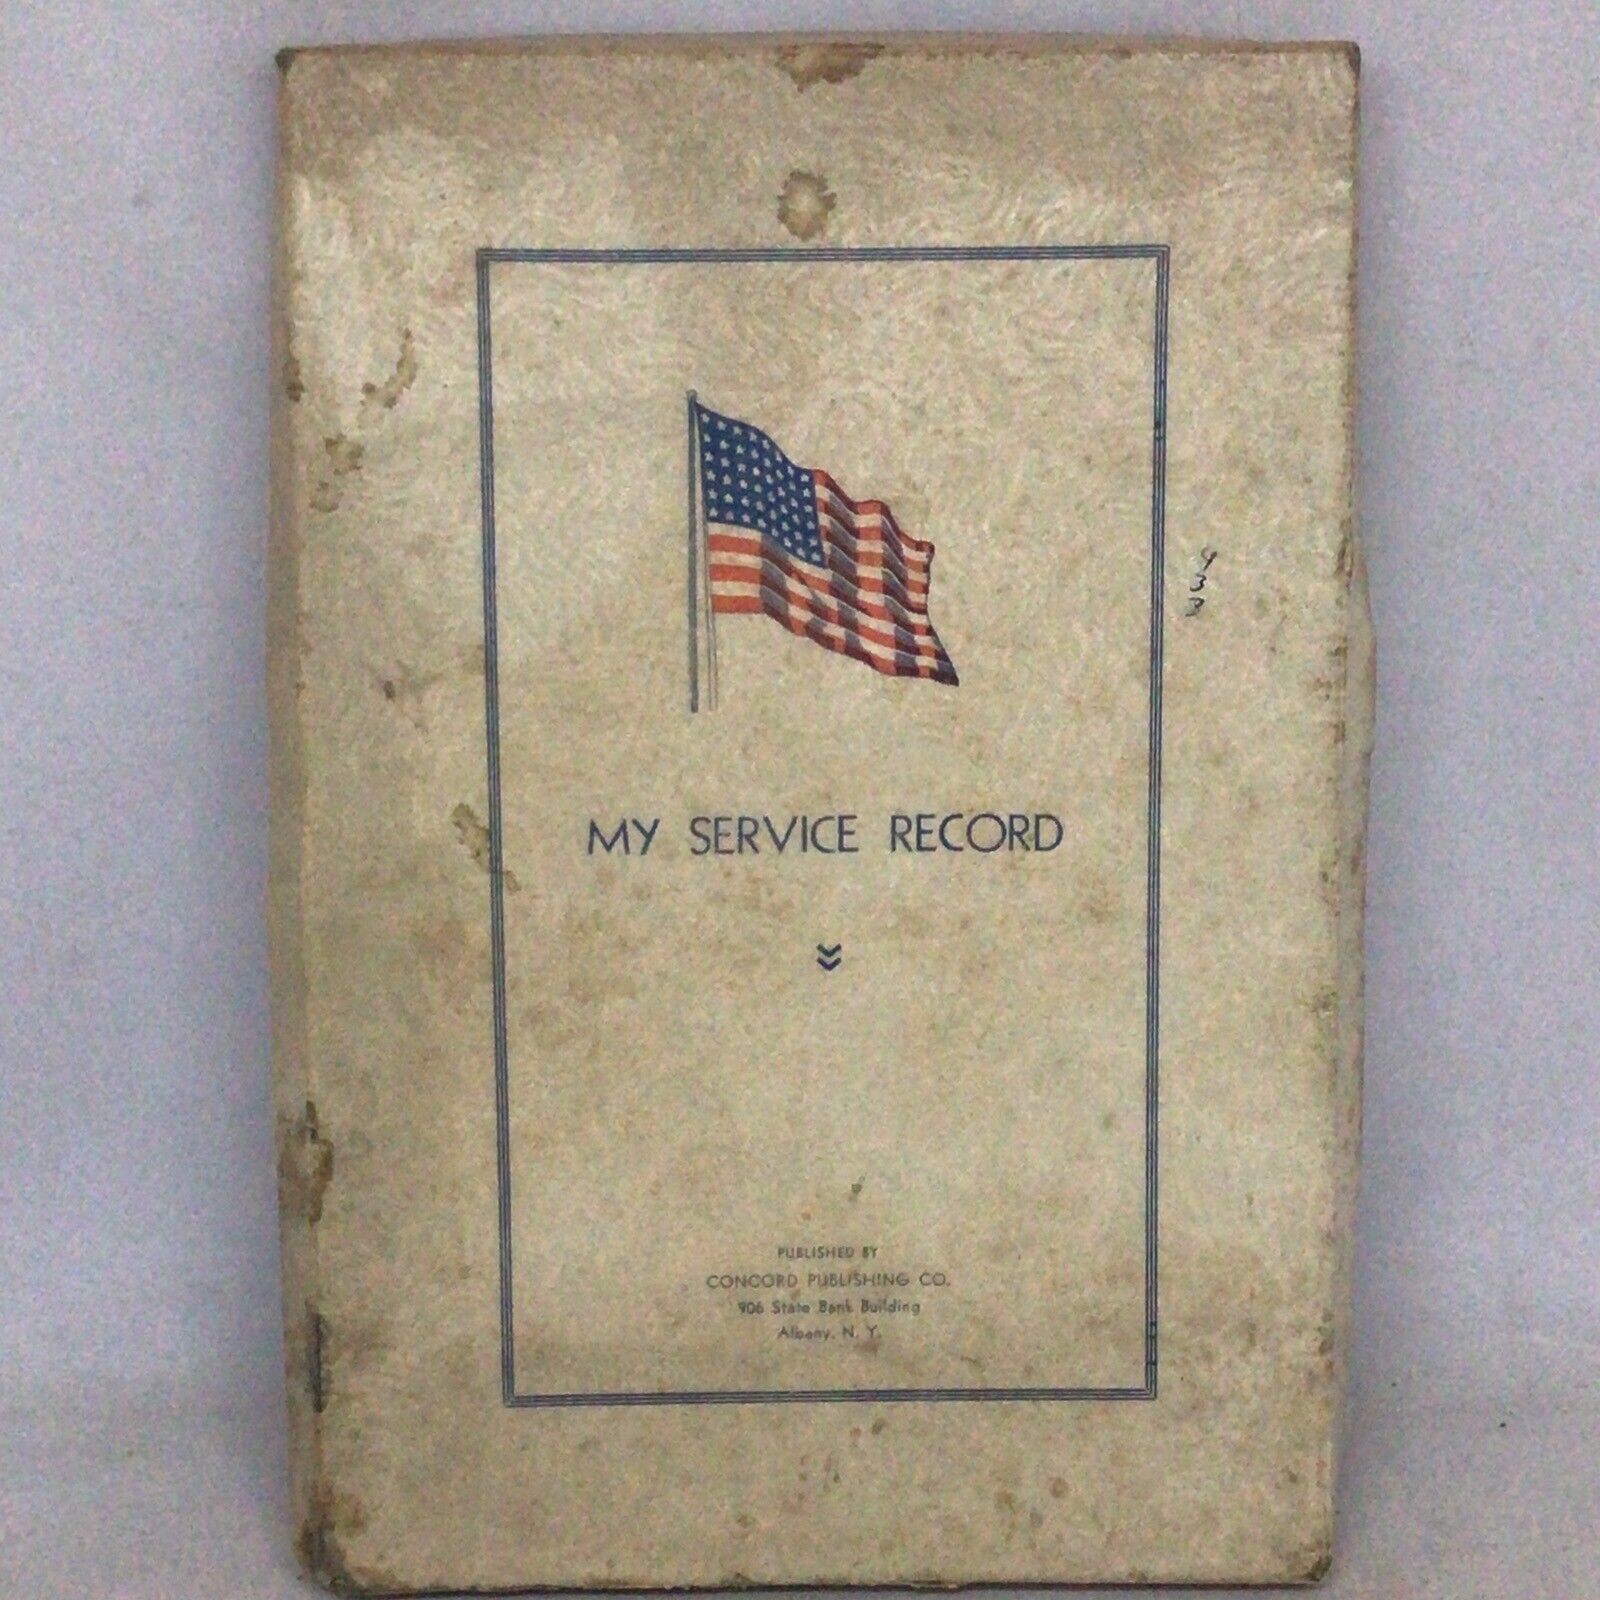 Vintage 1940 WWII Air Force My Service Record Book + Original Box NOT USED